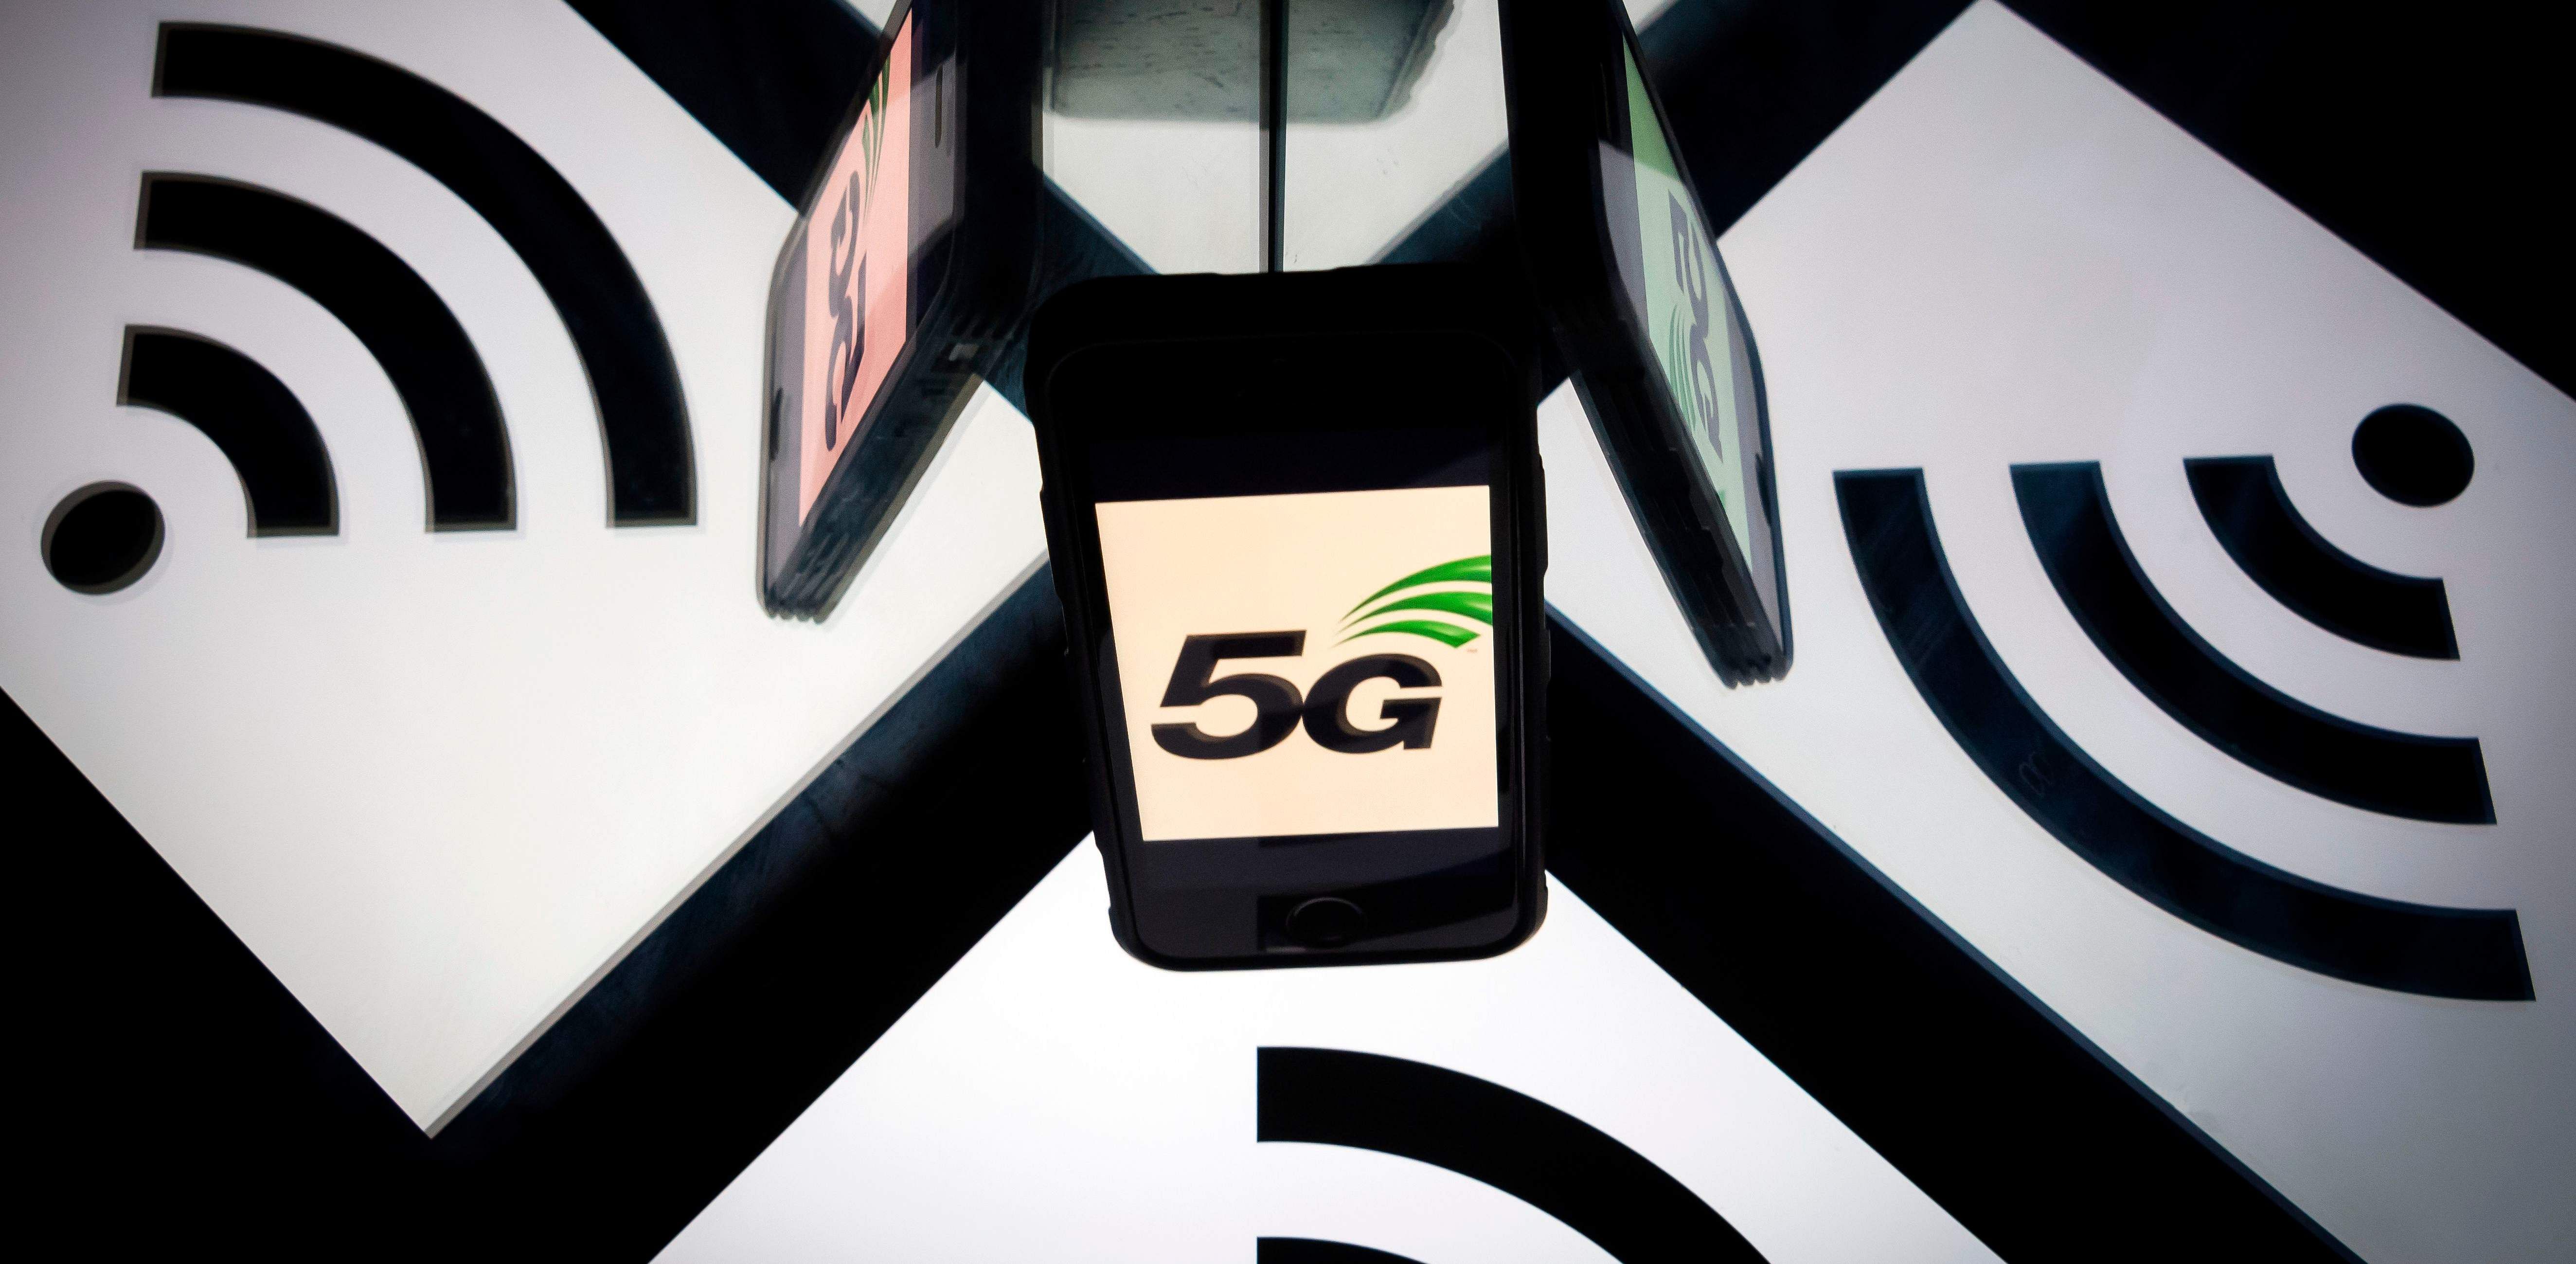 Unlike previous generation technologies, 5G is expected to embrace and support specialised use cases in sectors like manufacturing, energy, utilities, healthcare, pharmaceutical, transportation and logistics.  Credit: AFP/ Representative